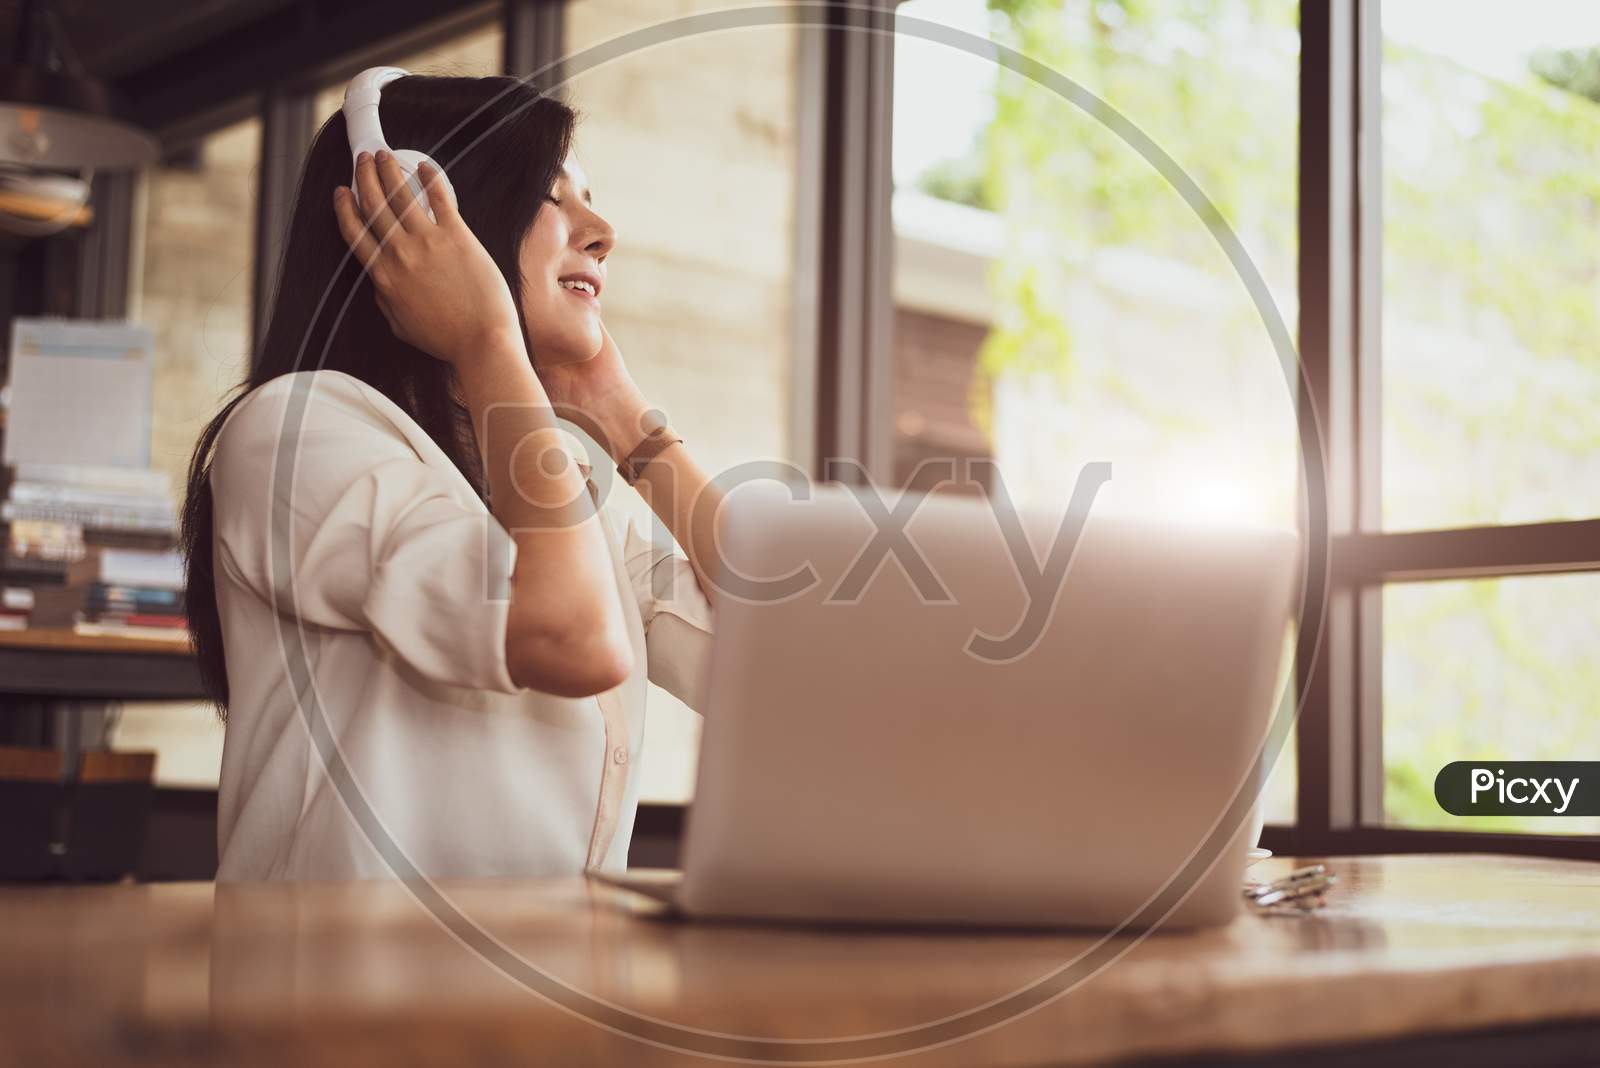 Happy Asian Woman Relaxing And Listening Music In Coffee Shop With Computer Laptop. People And Lifestyles Concept. Freelance And Outdoors Workplace Outdoors Theme.